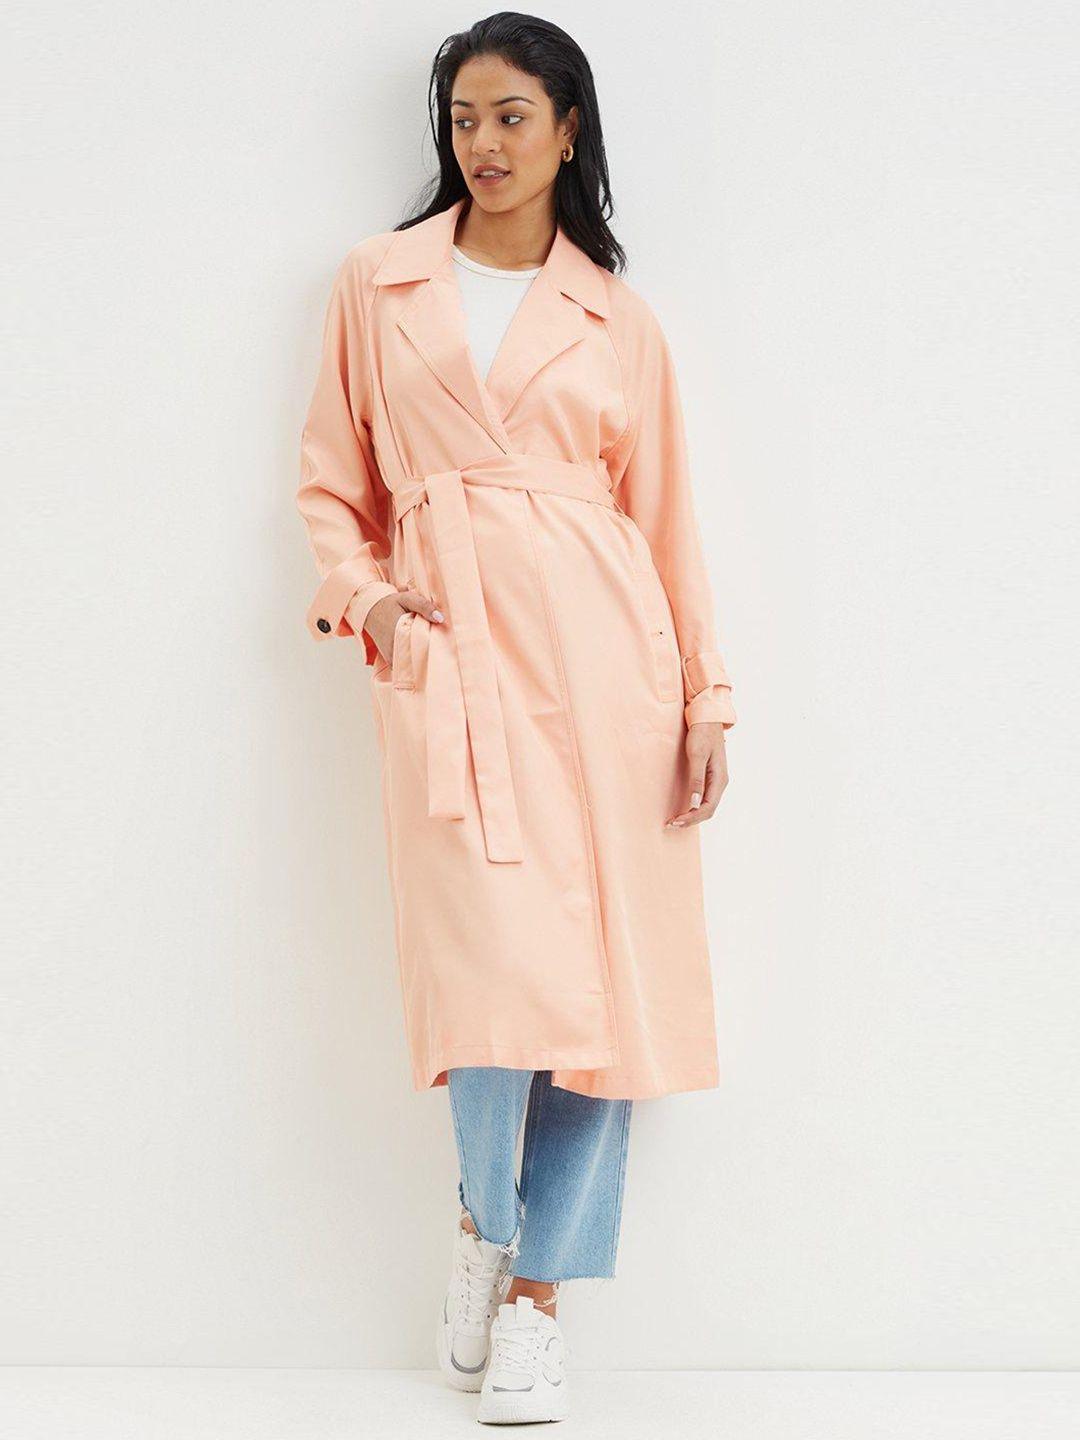 dorothy perkins women peach-coloured solid cotton longline trench coat comes with belt